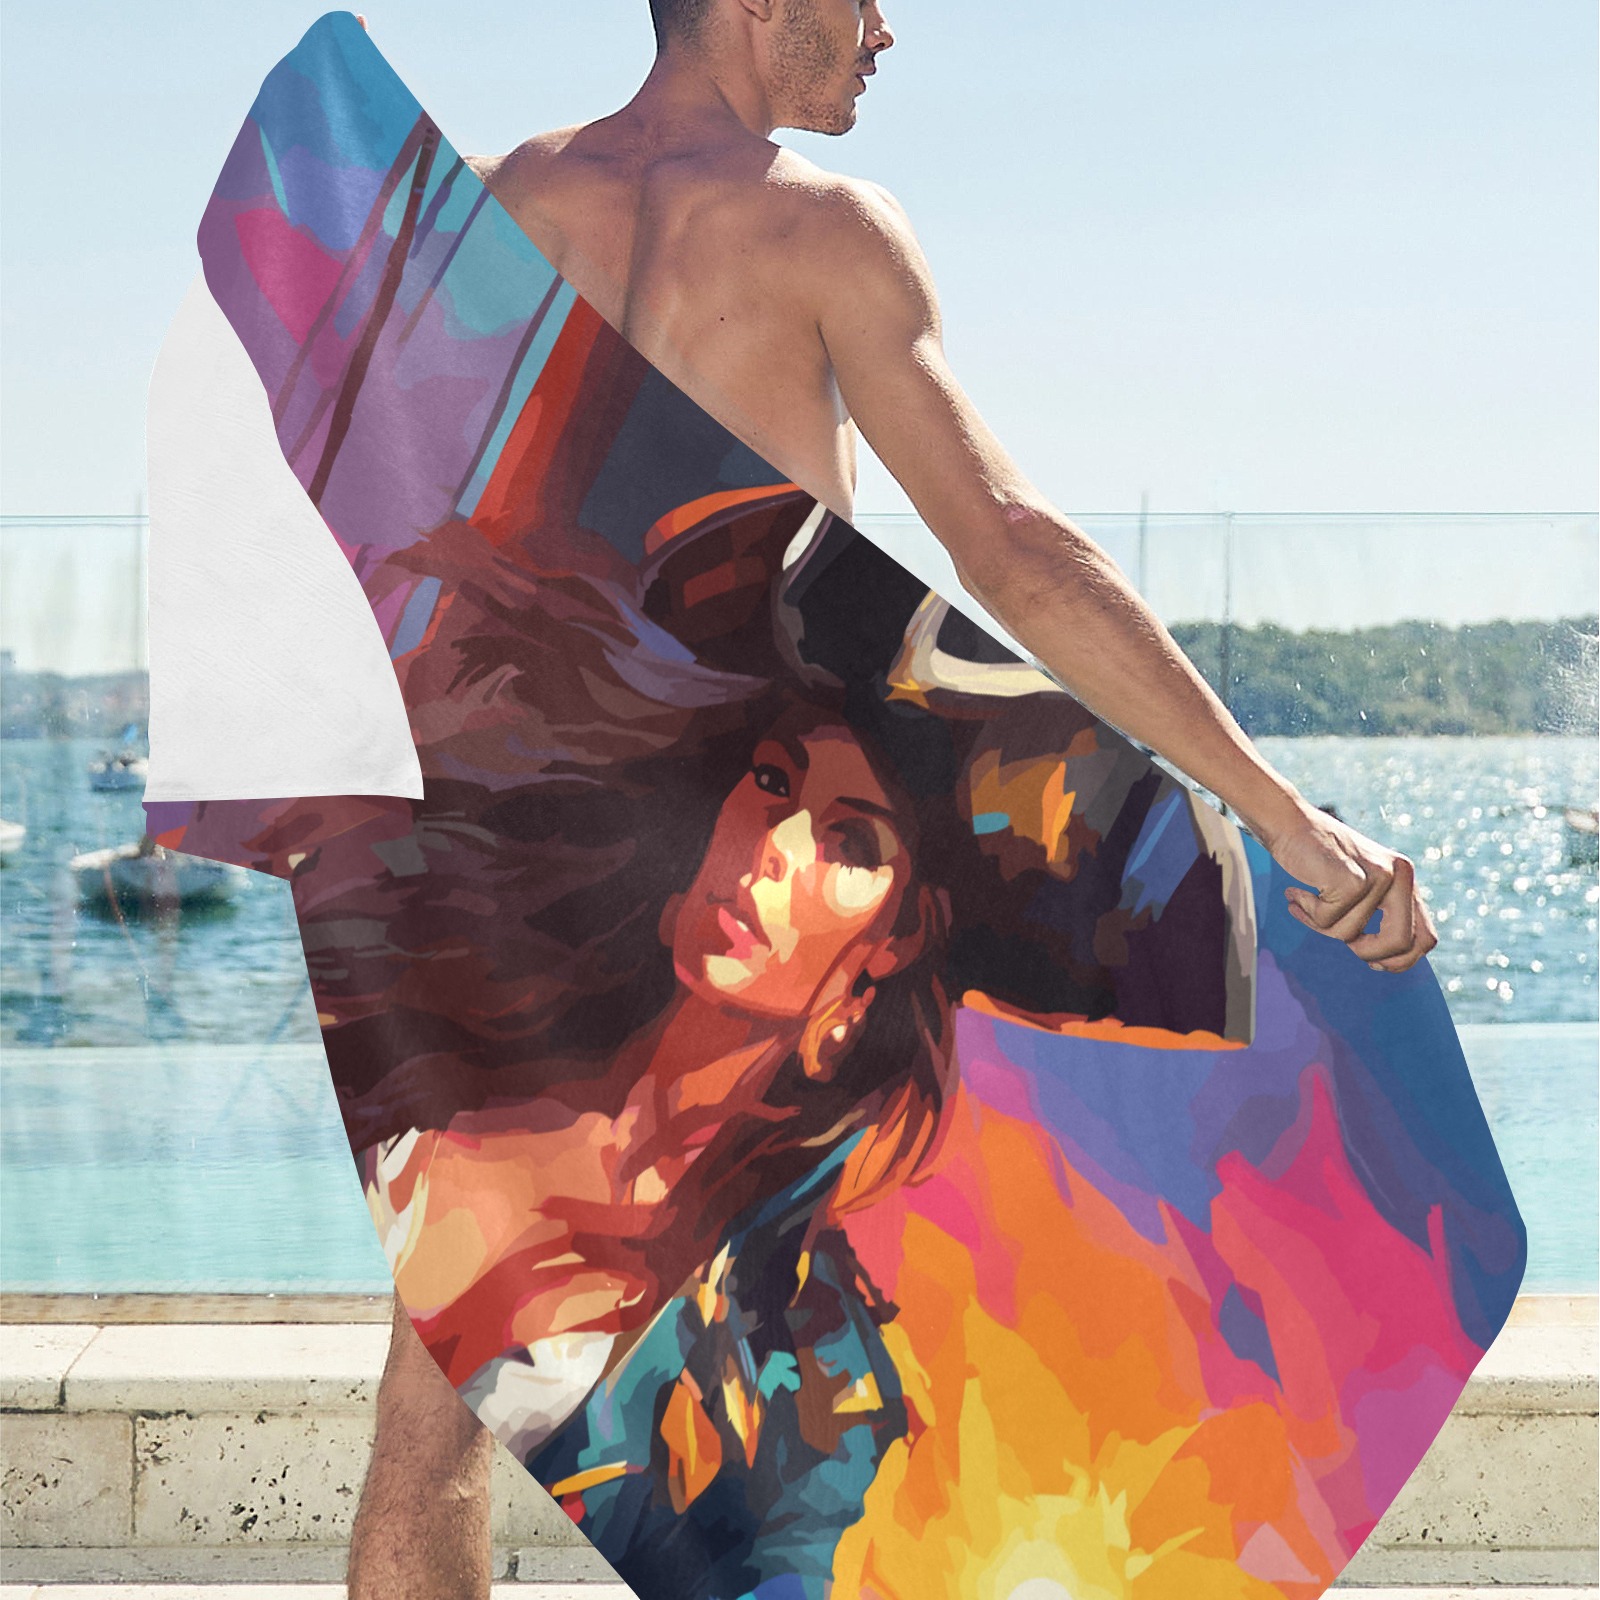 Pirate girl master and commanter at ocean sunset. Beach Towel 32"x 71"